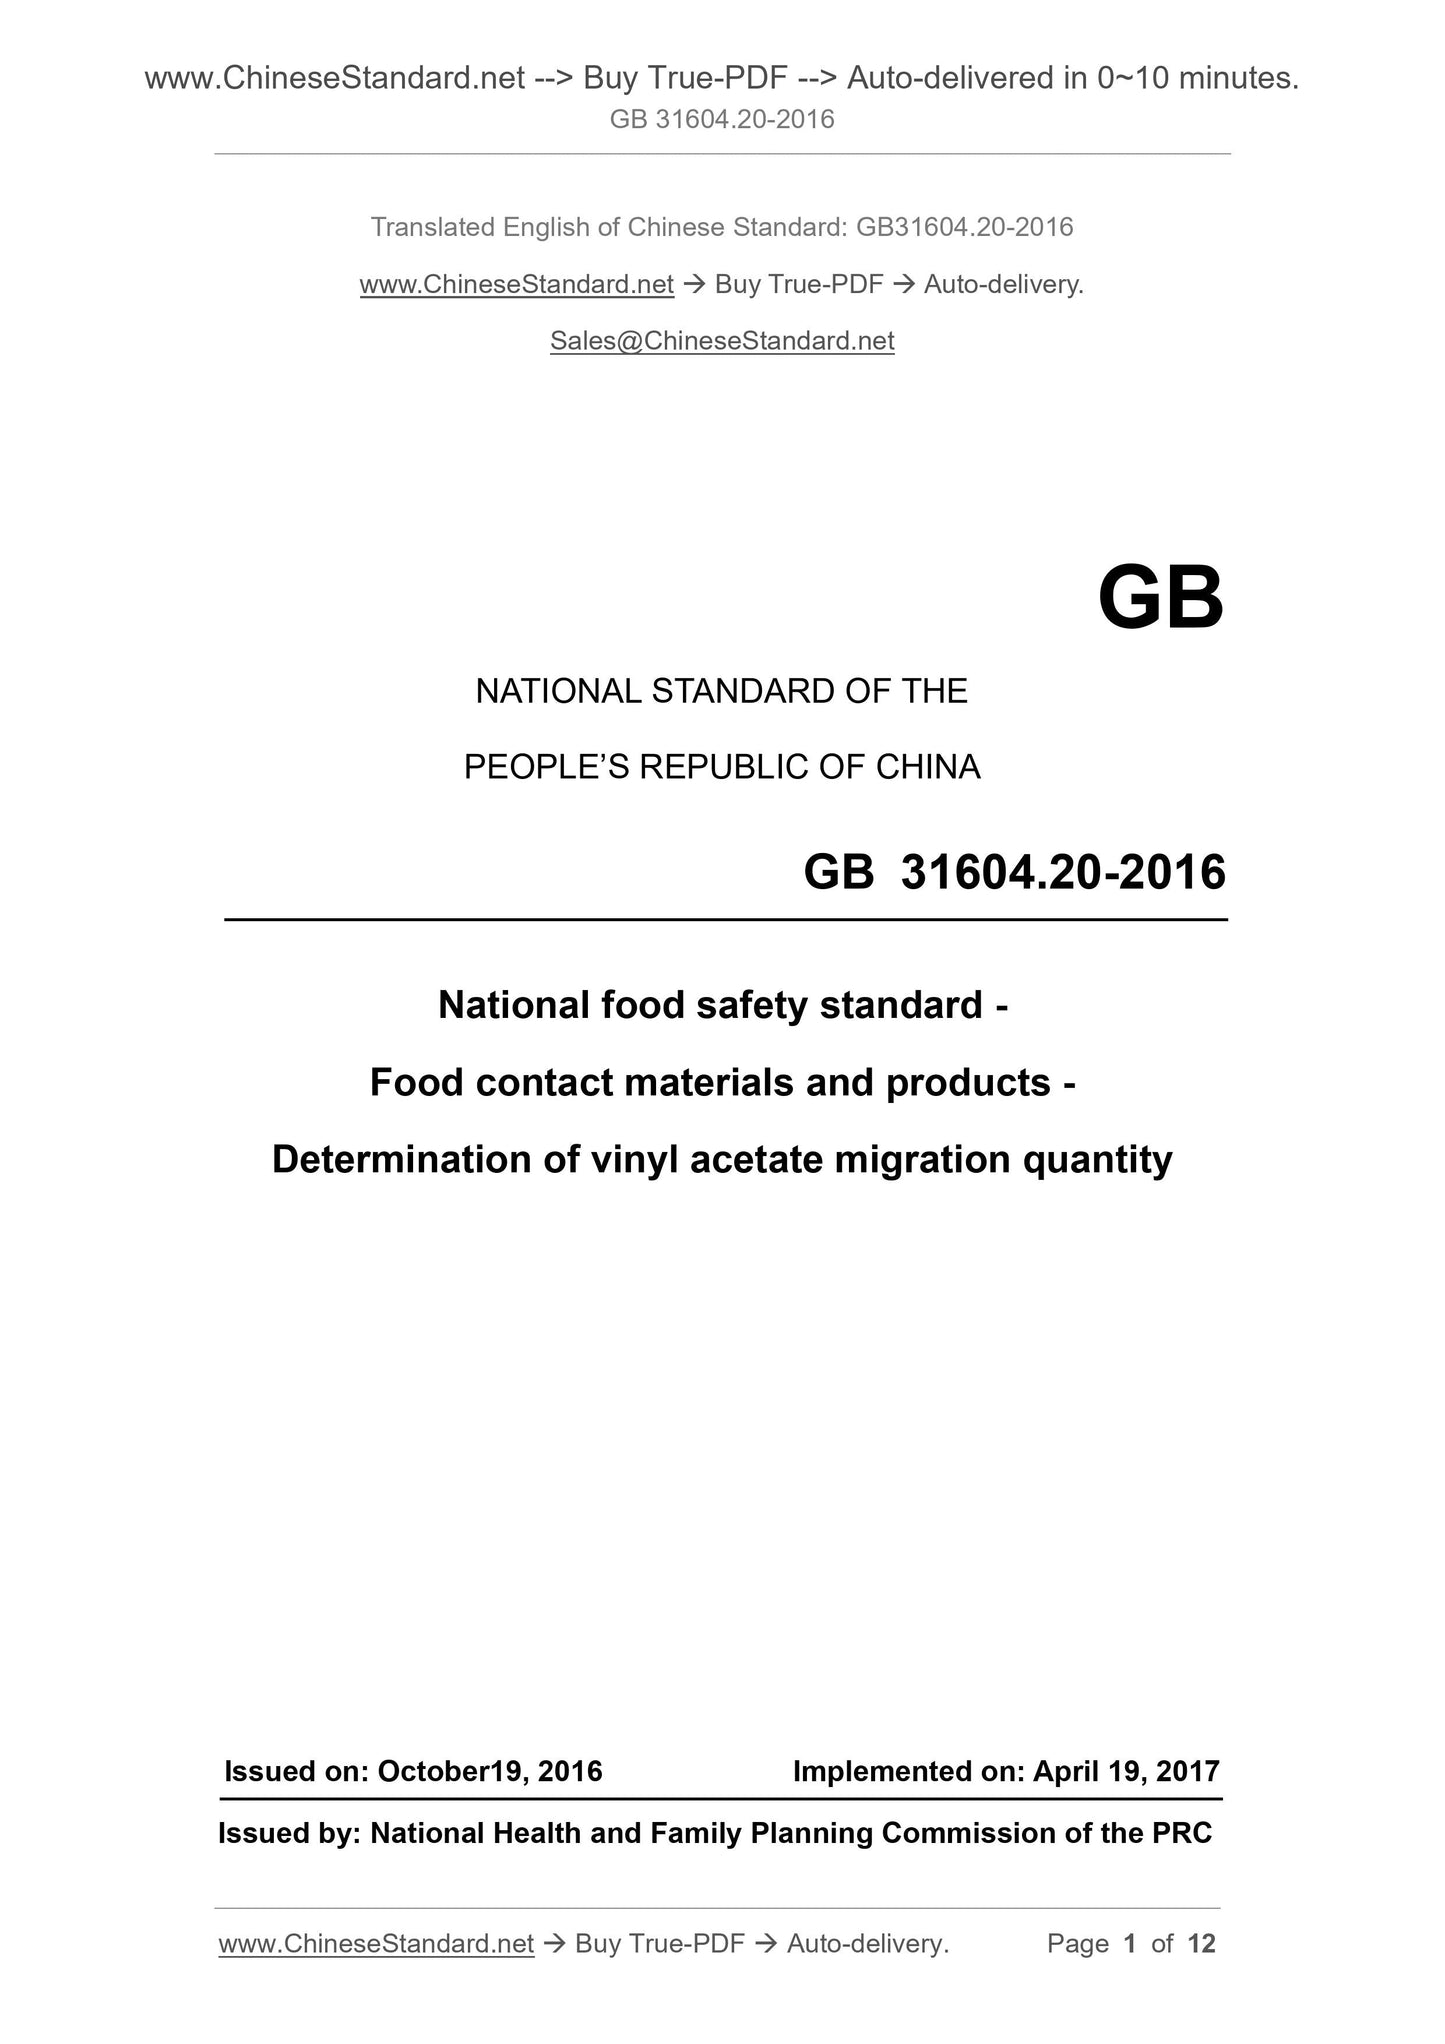 GB 31604.20-2016 Page 1